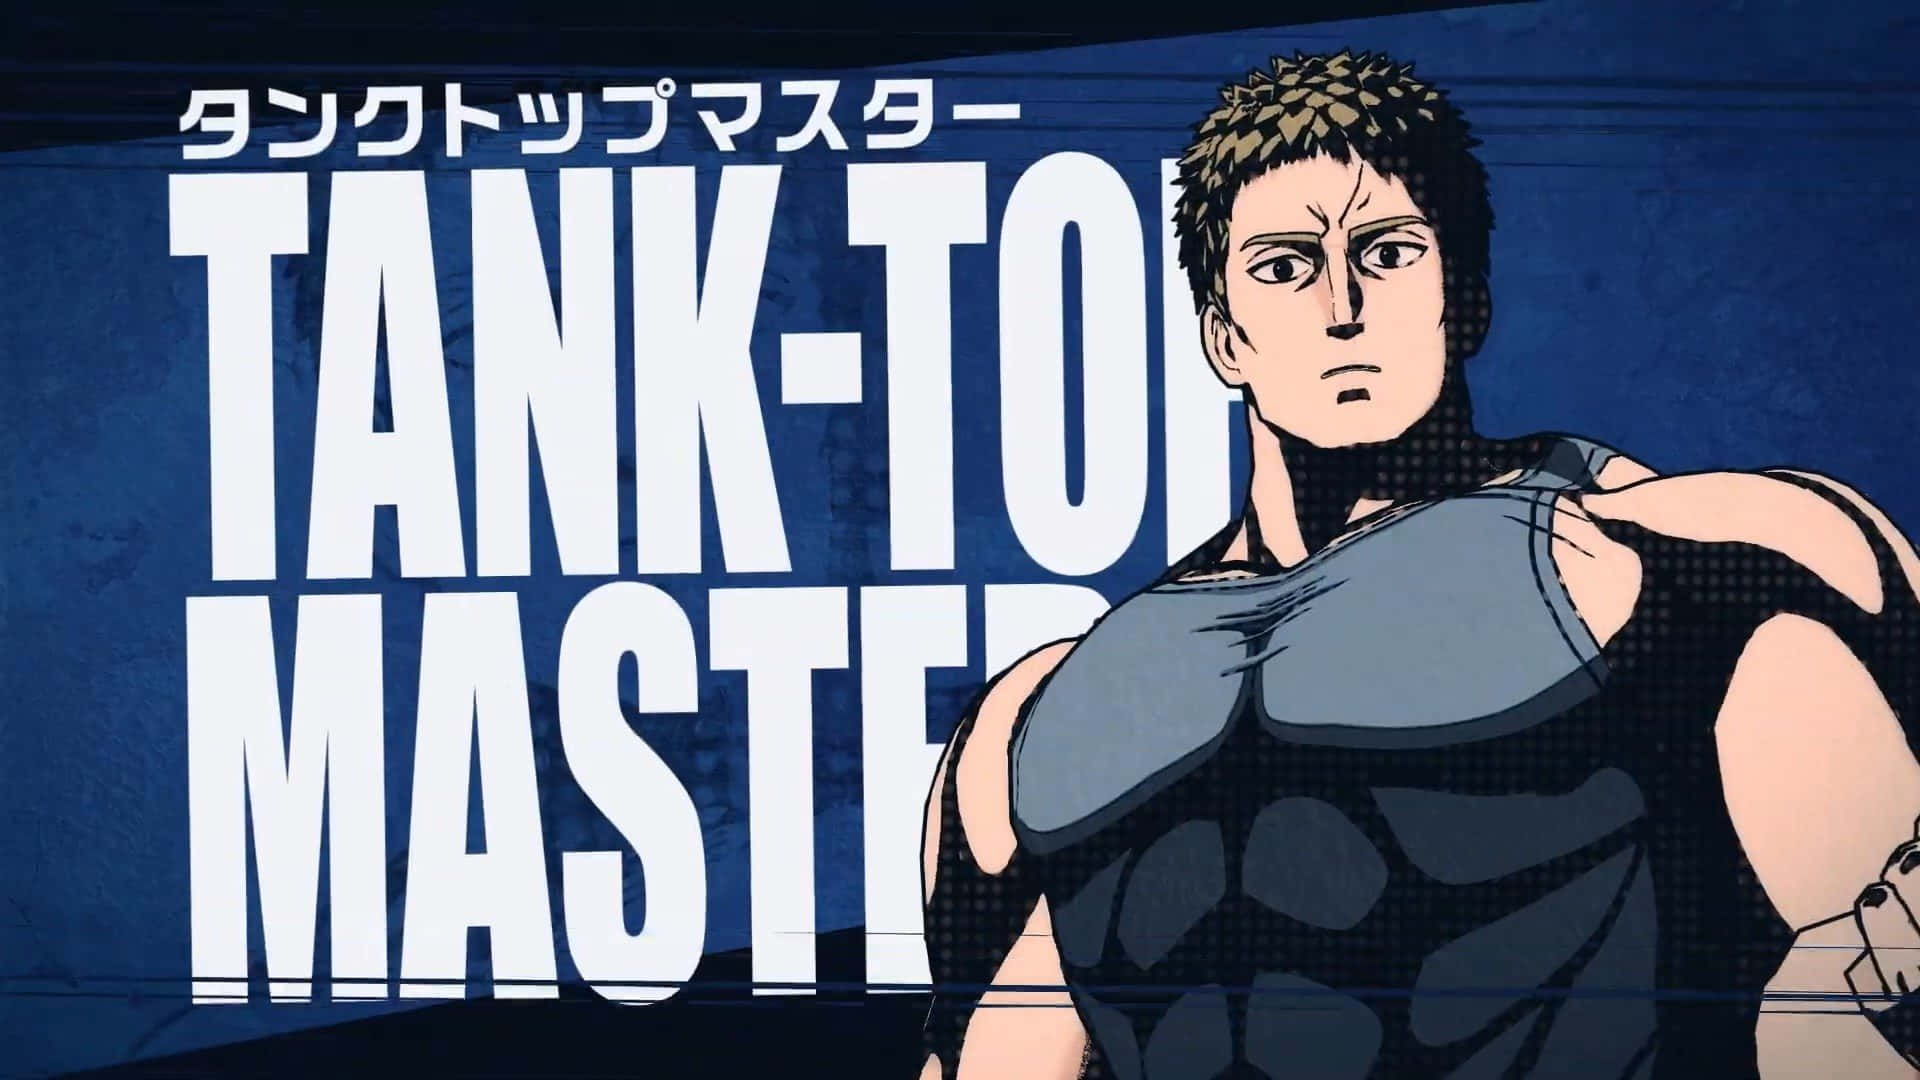 Tanktop Master showcasing his powerful muscle in action Wallpaper